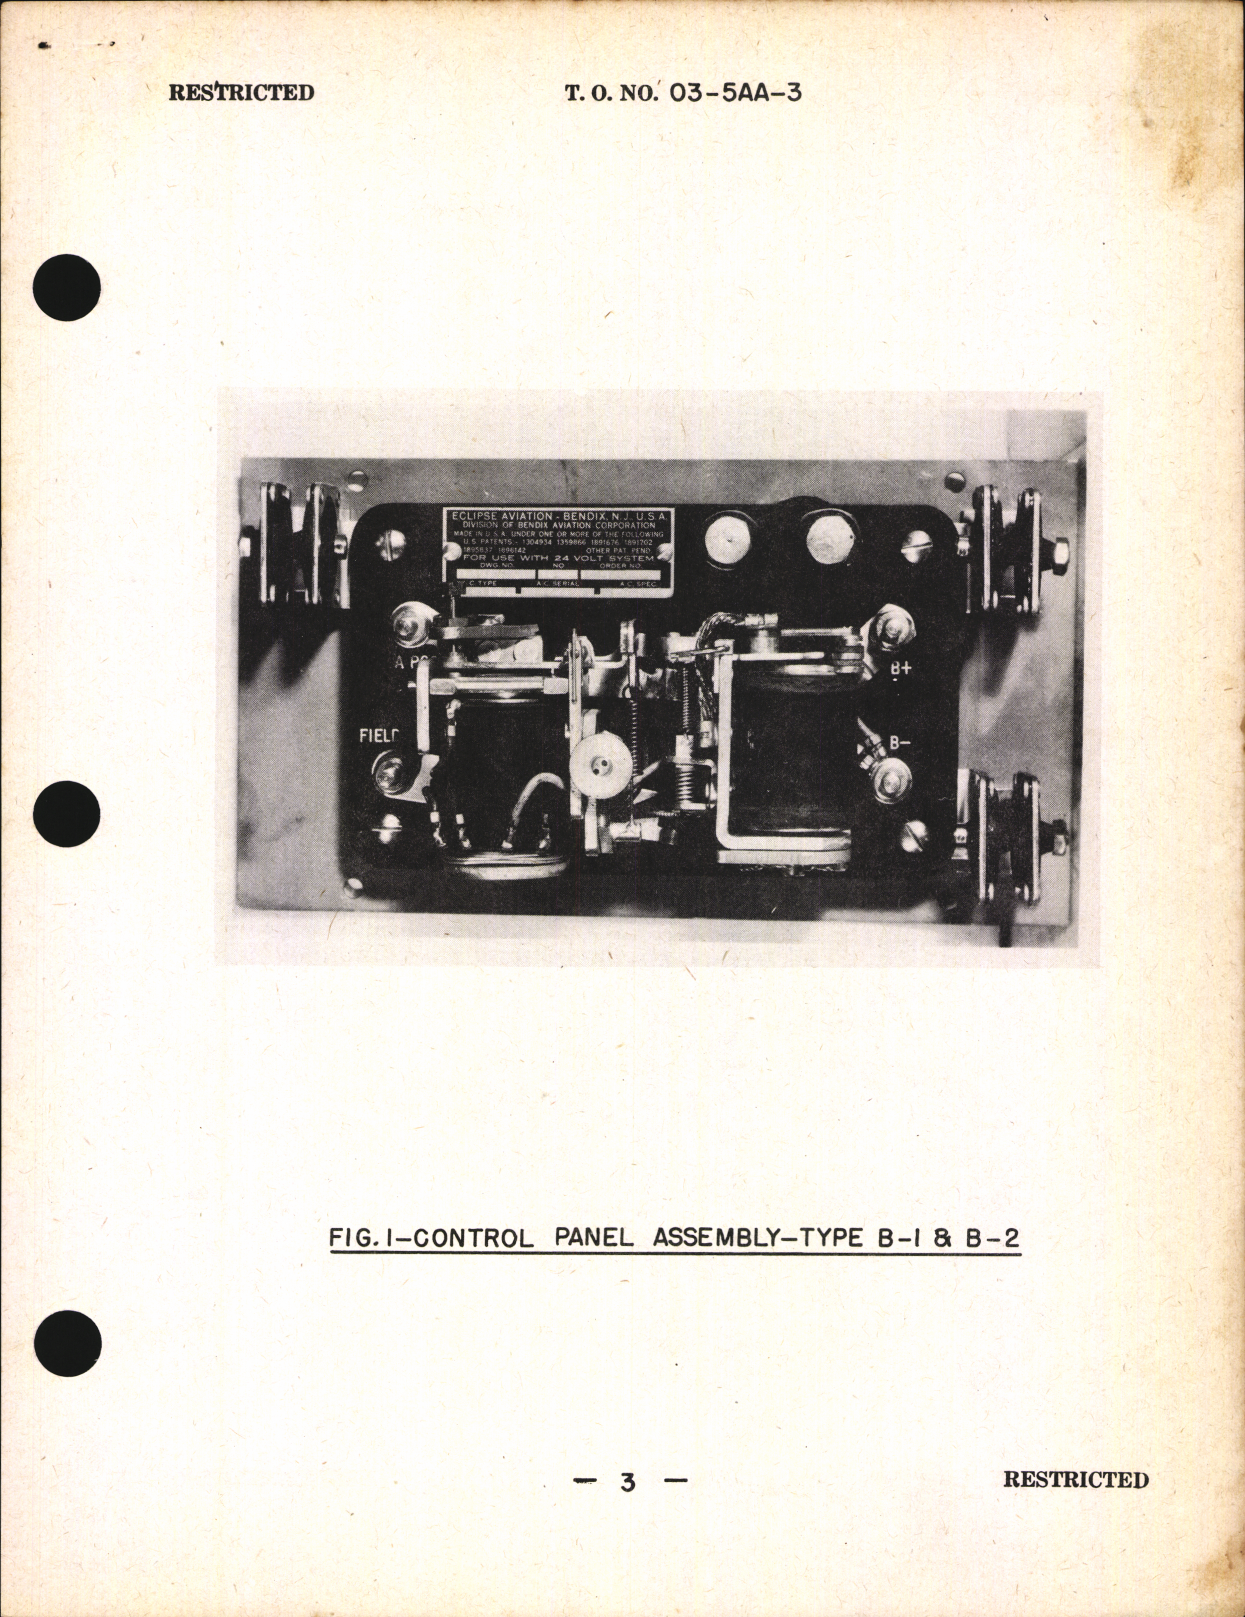 Sample page 5 from AirCorps Library document: Handbook of Instructions for Types B-1 and B-2 Generator Control Panels and Type 320 Control Box